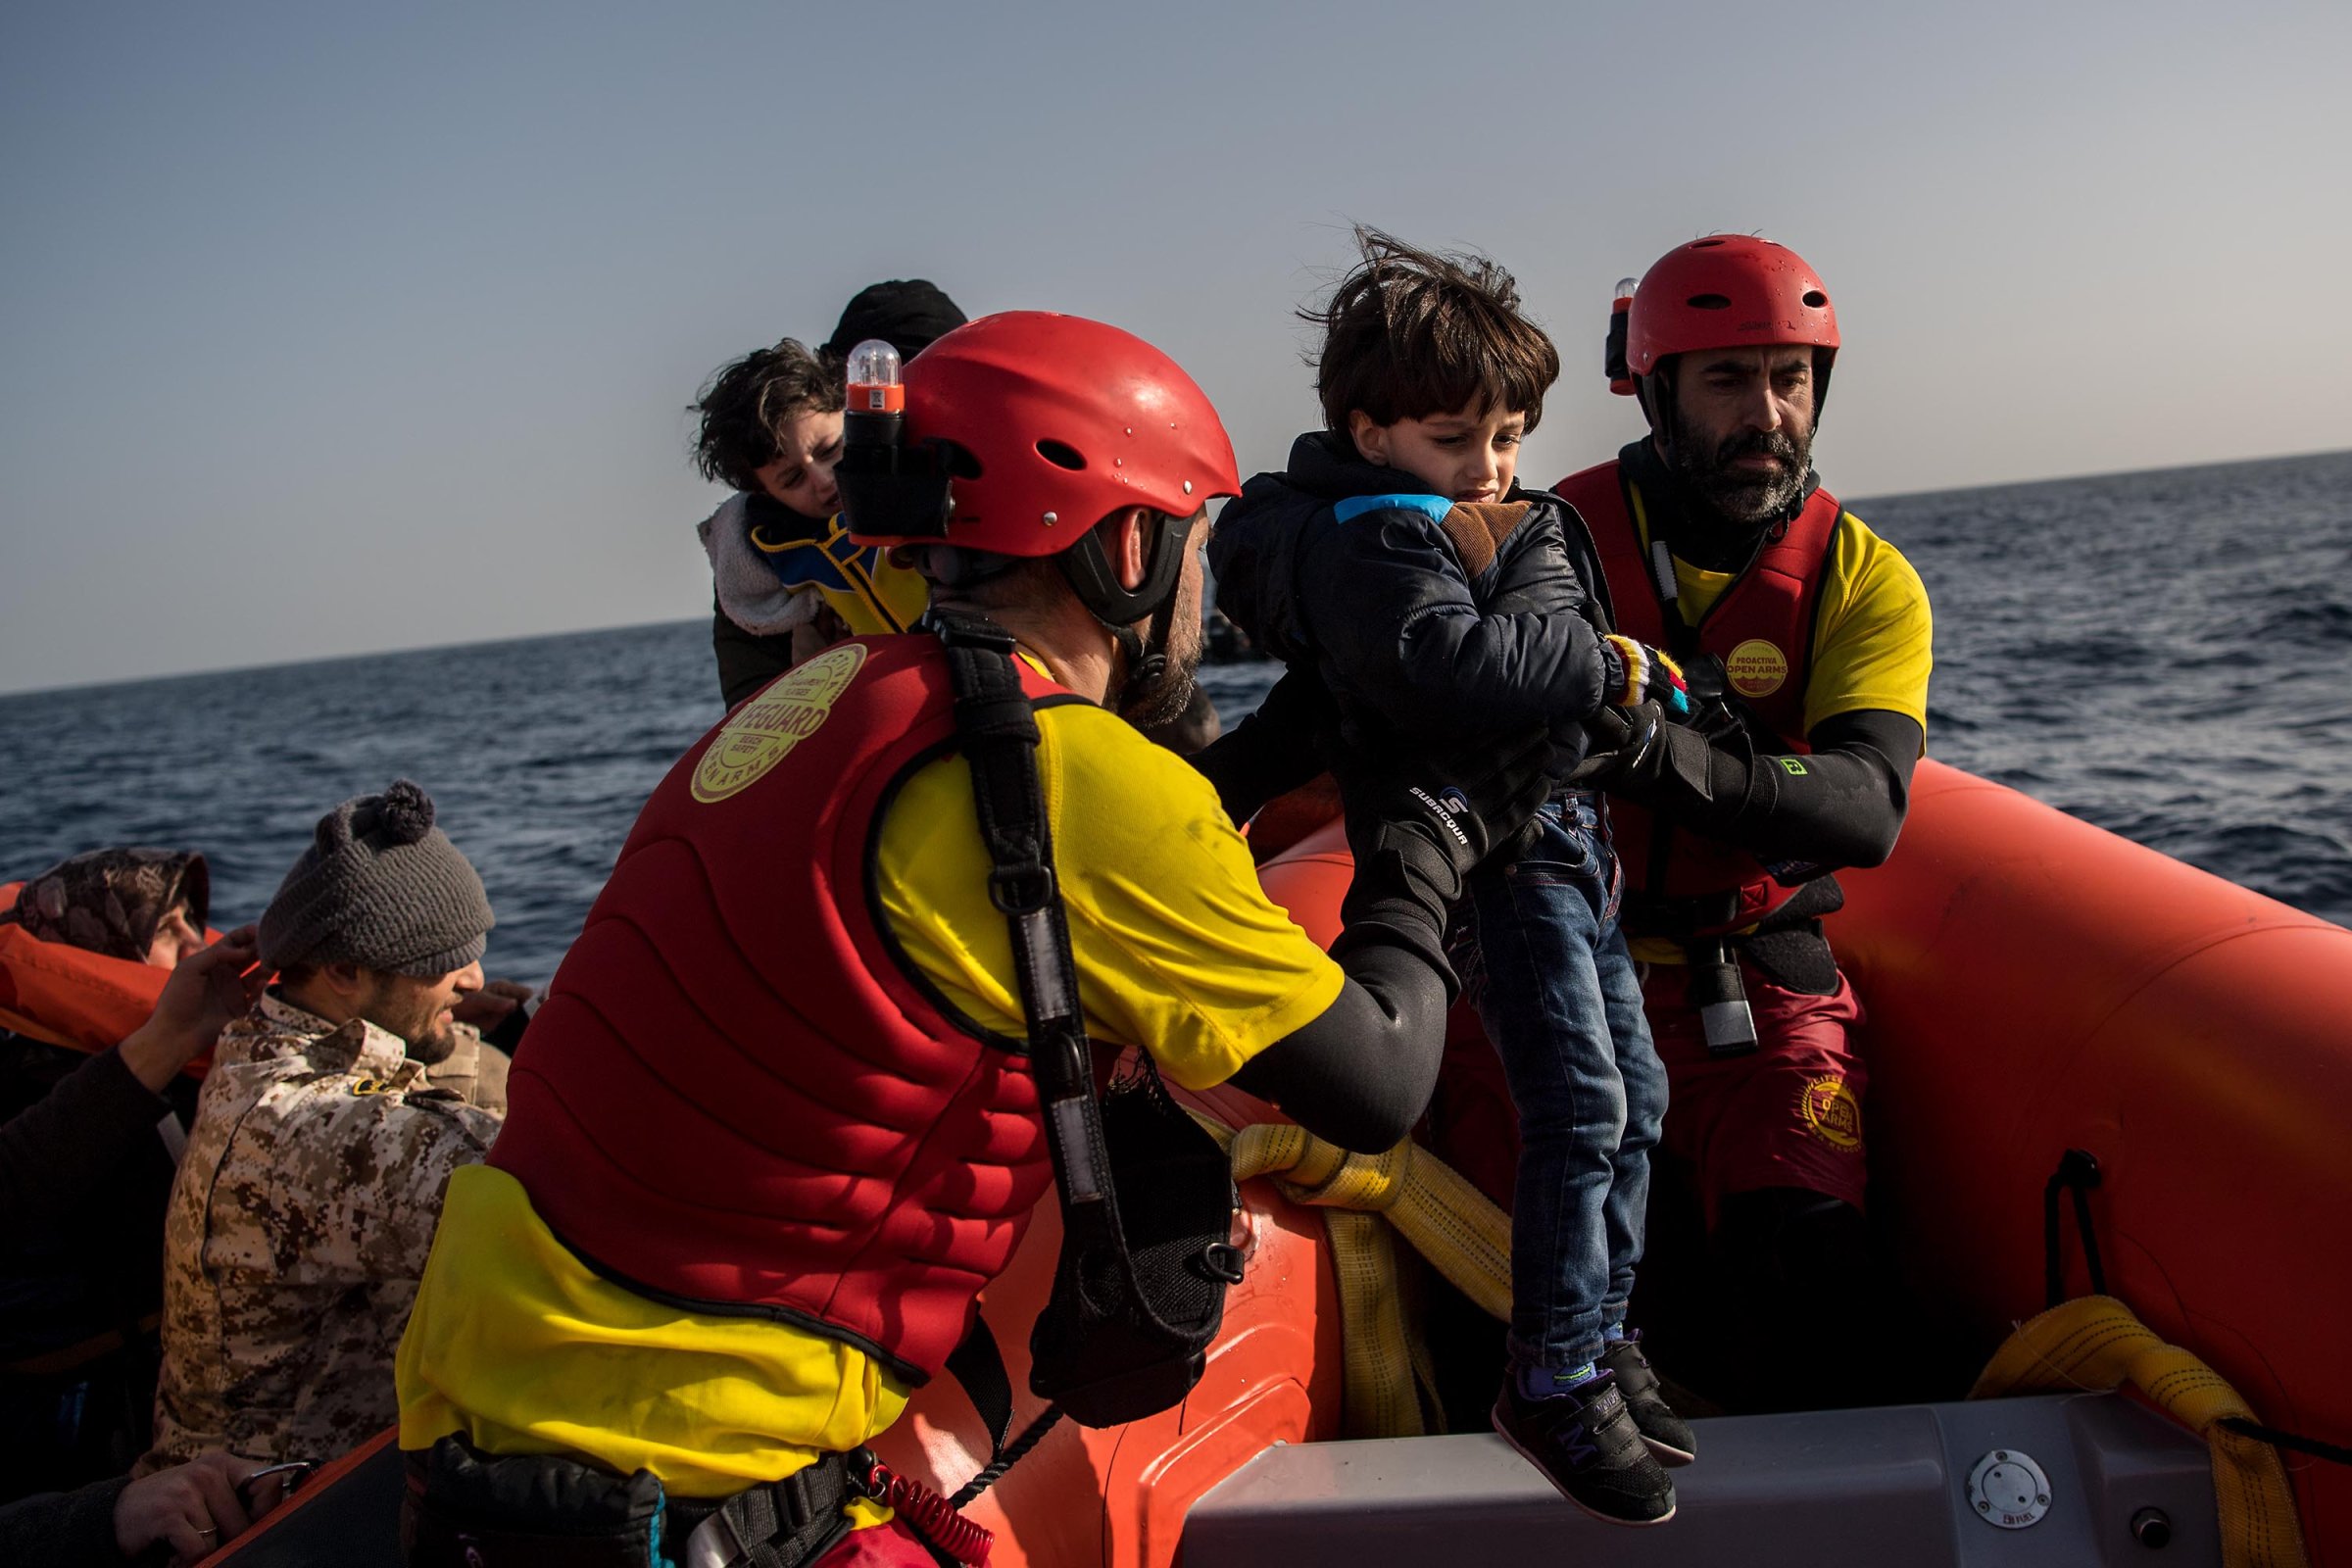 Ahmed Mohamad (L) 1 and his brother Hossia Mohamad, 3, of Syria are assisted by members of the Spanish NGO Proactiva Open Arms as he and his family are rescued from a wooden boat north of Sabratha, Libya on February 18, 2017.